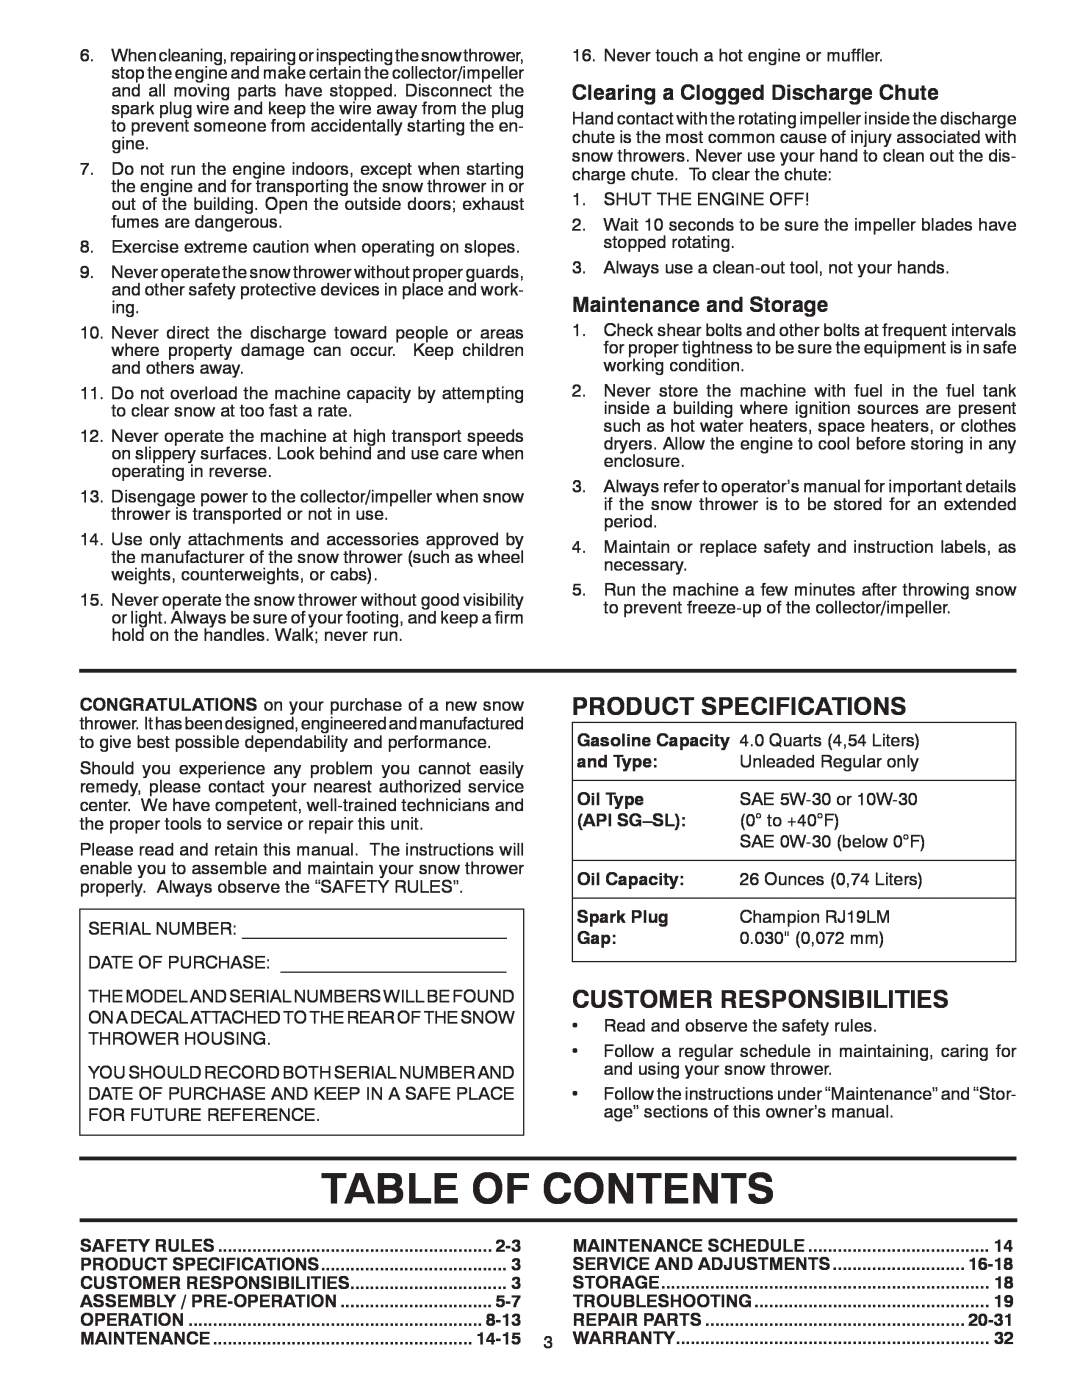 Poulan 415153 Table Of Contents, Product Specifications, Customer Responsibilities, Clearing a Clogged Discharge Chute 